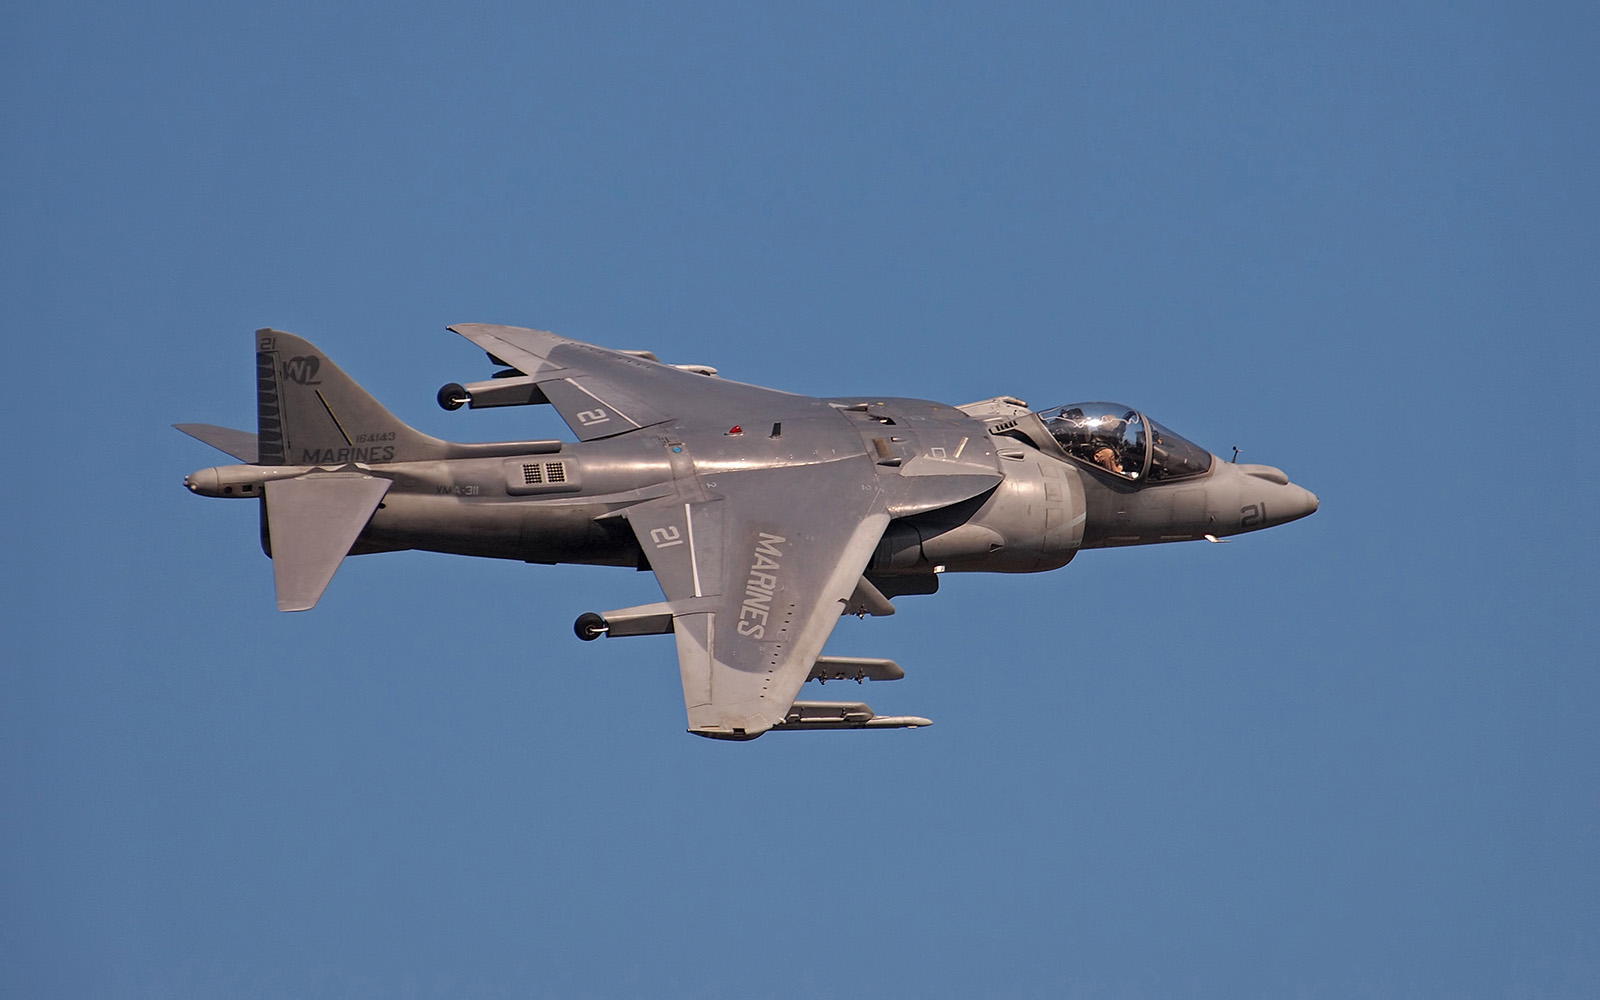 Harrier at EAA AirVenture 2011